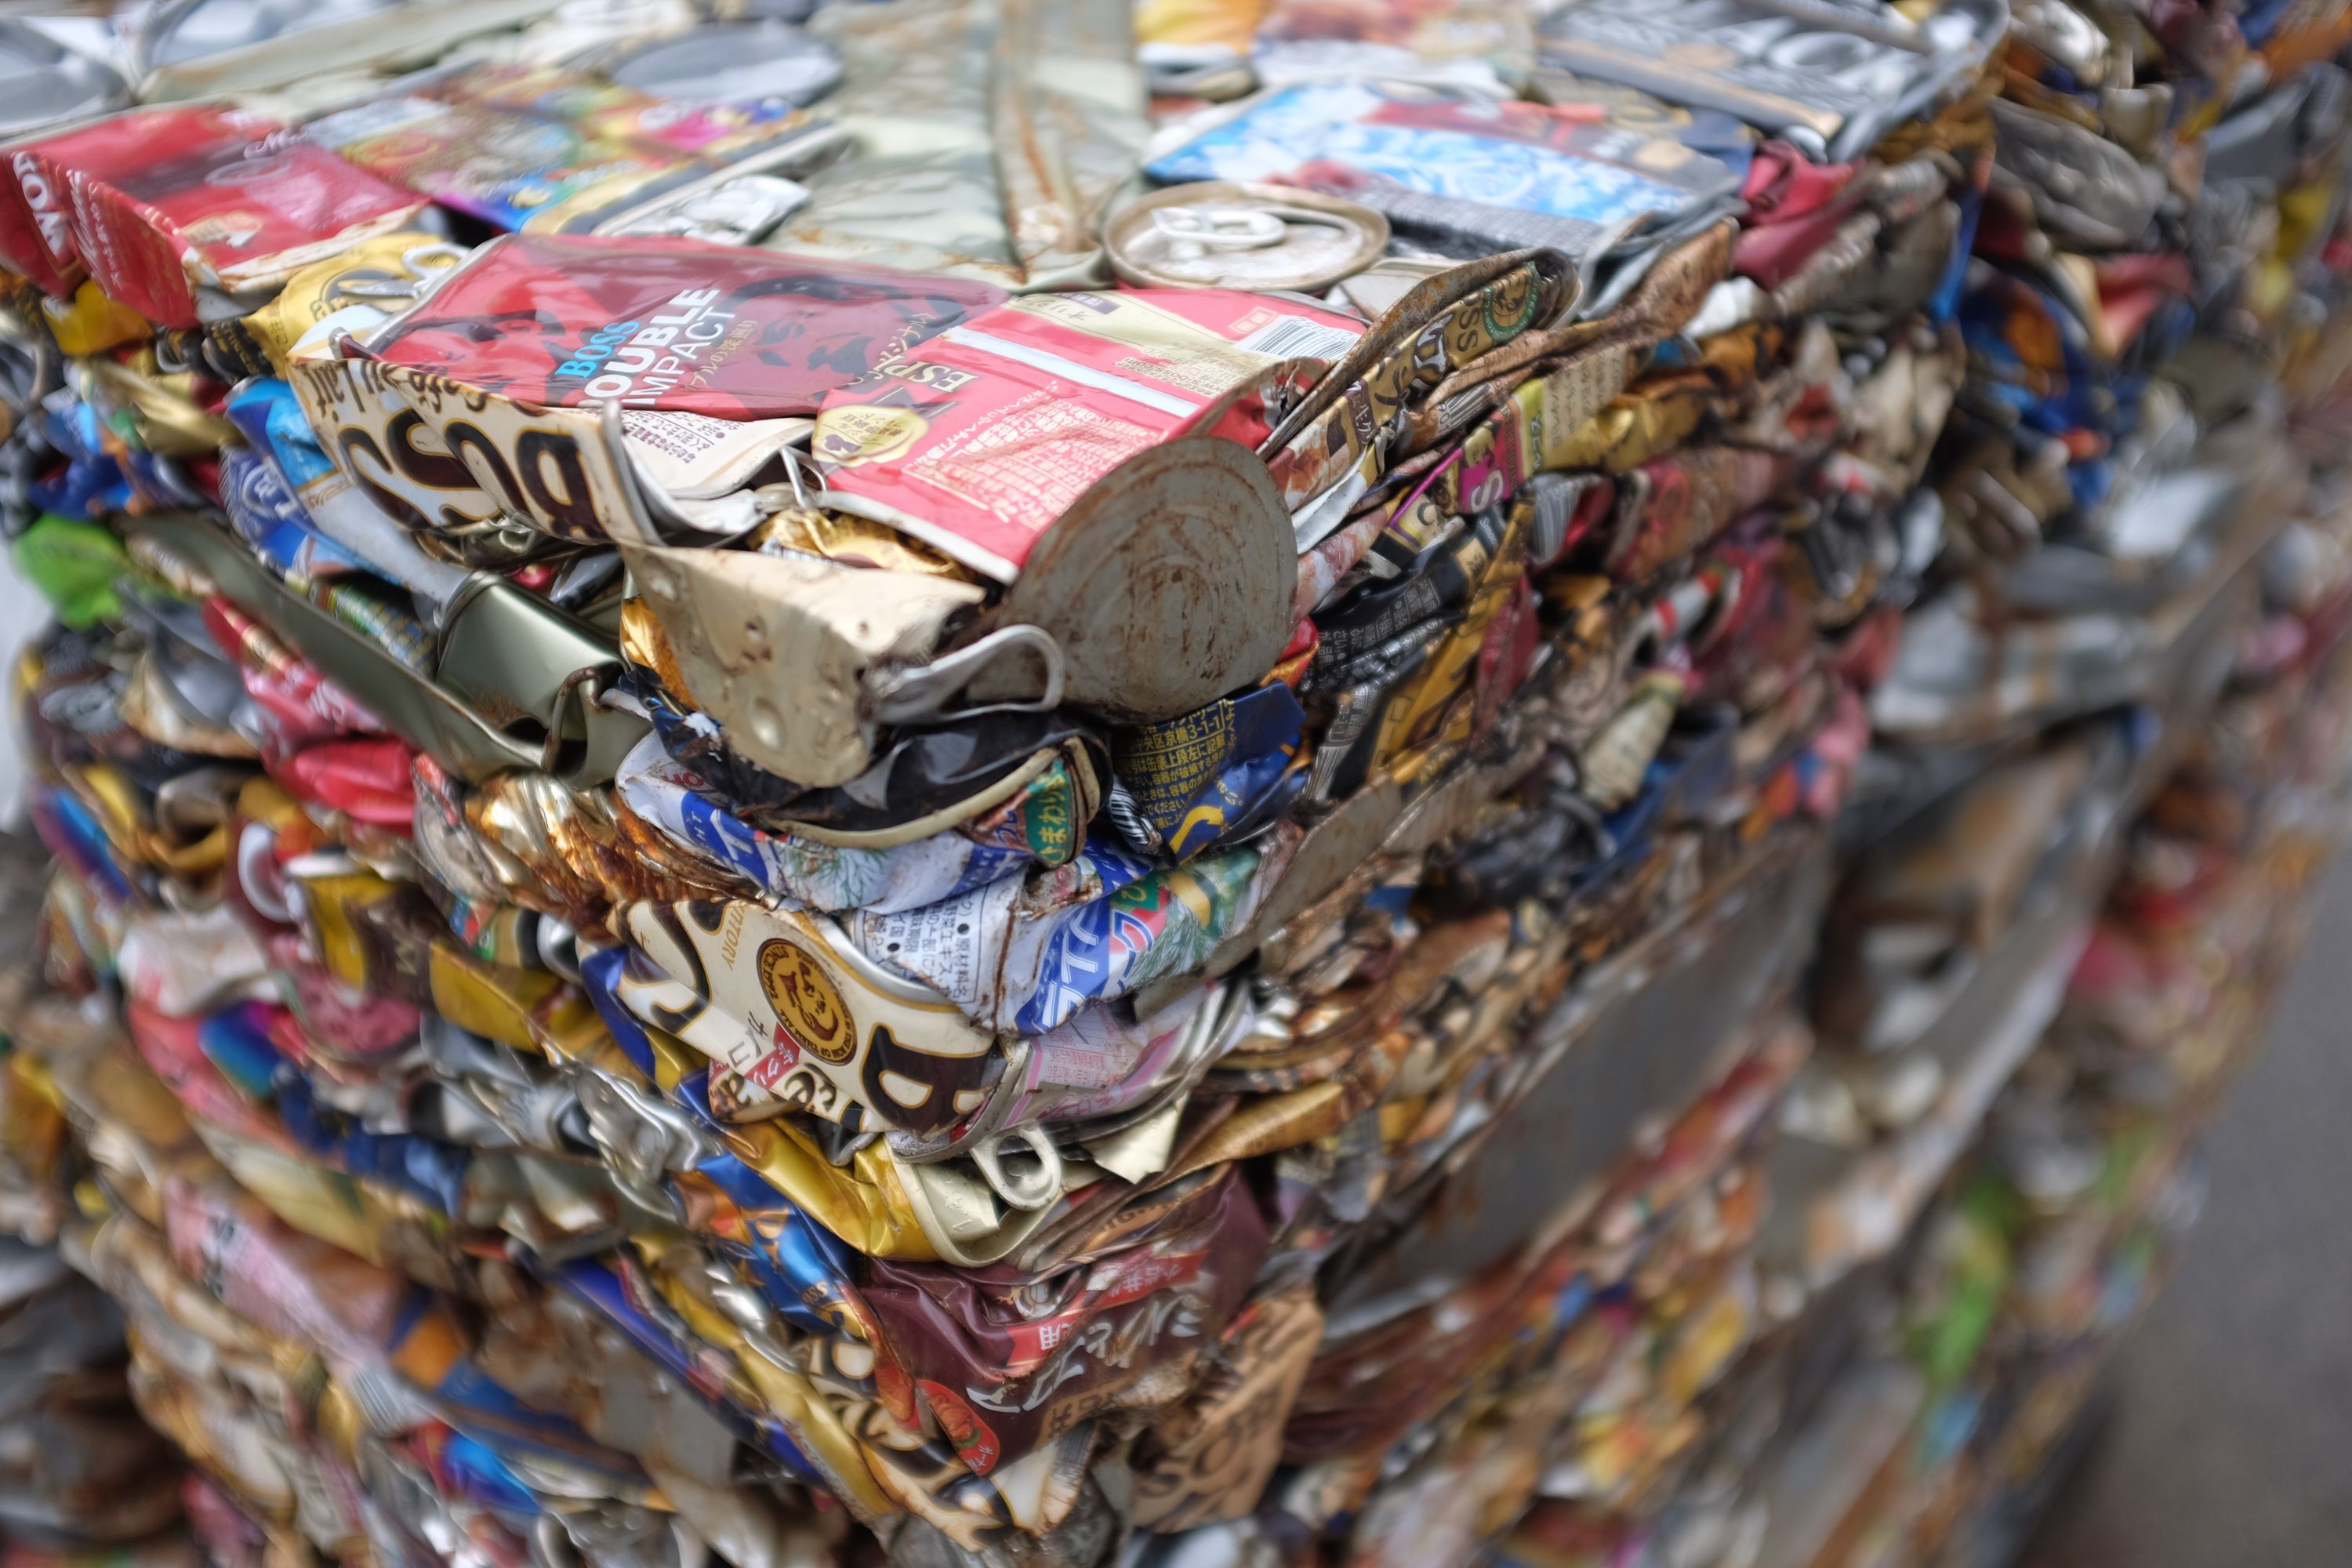 A large cube made of crushed coffee cans at a recycling plant.